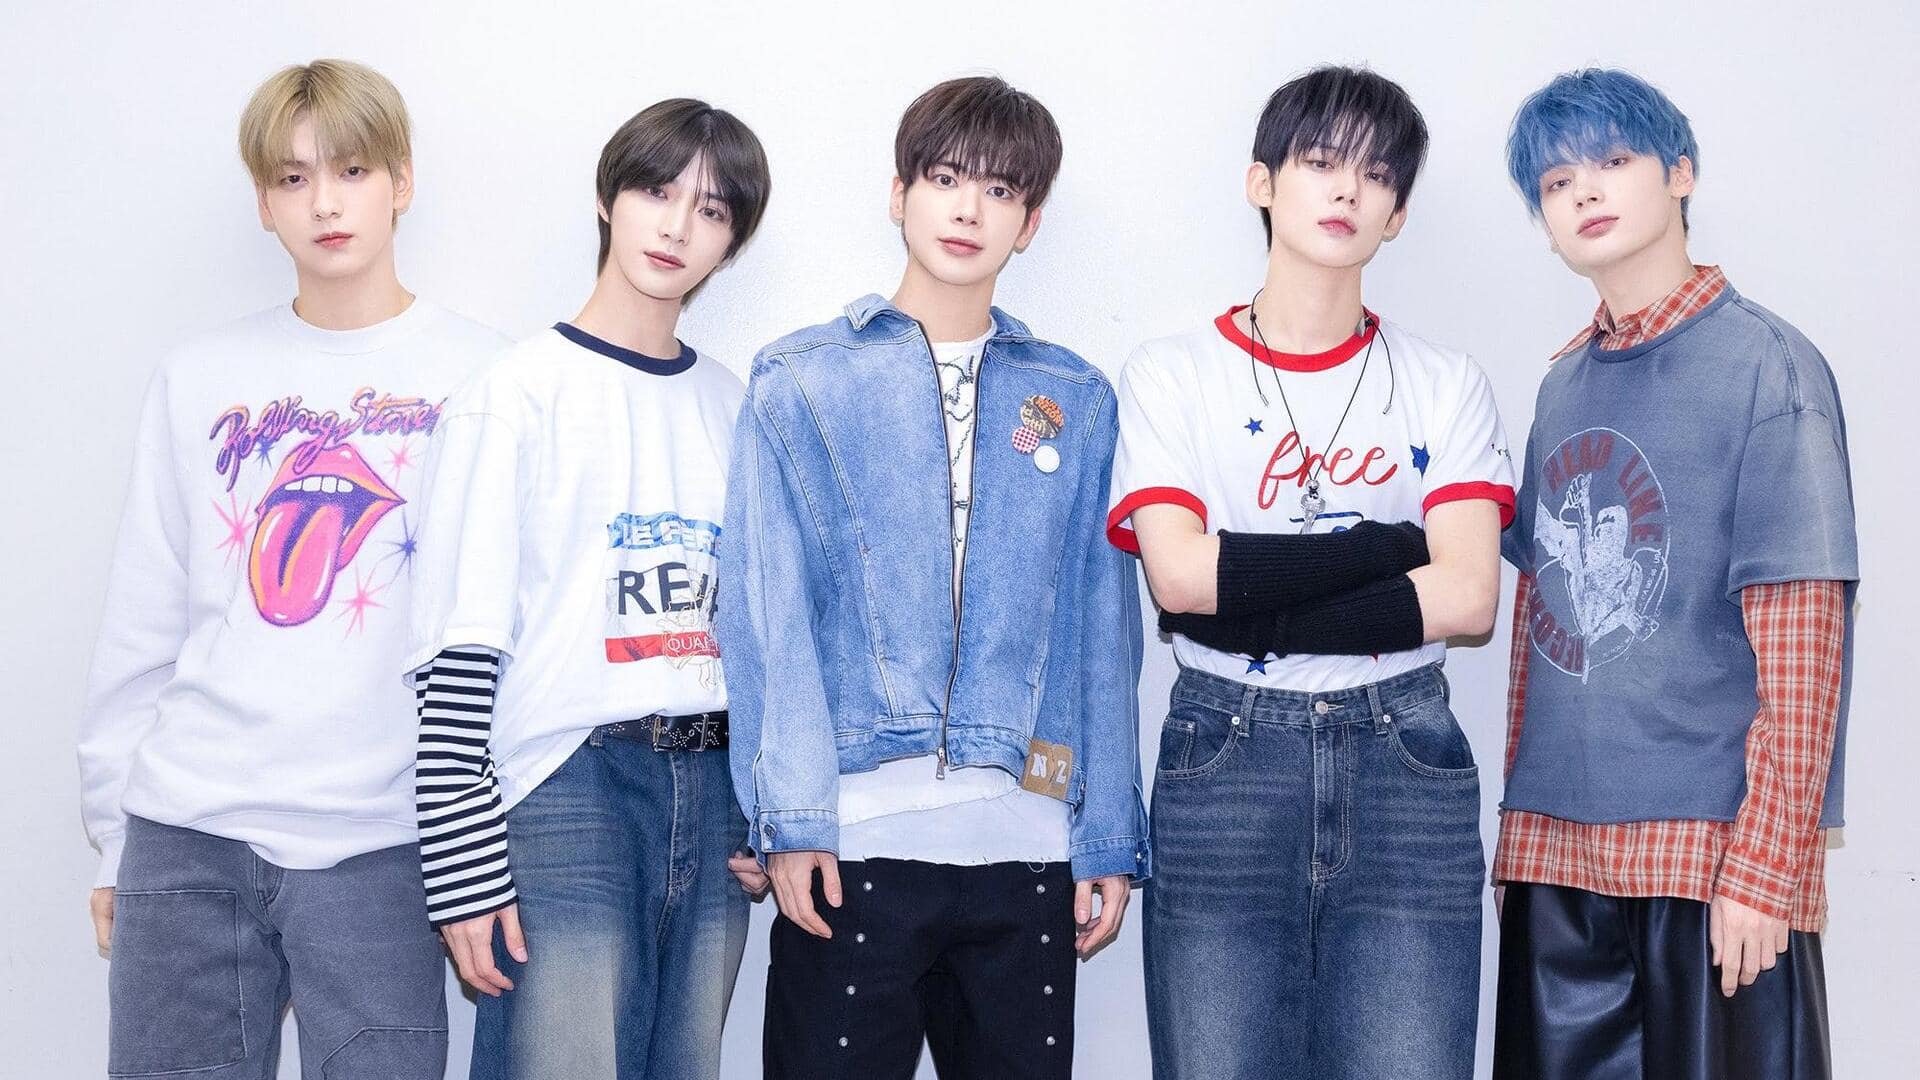 K-pop: TXT gears up for comeback with new album 'TOMORROW'